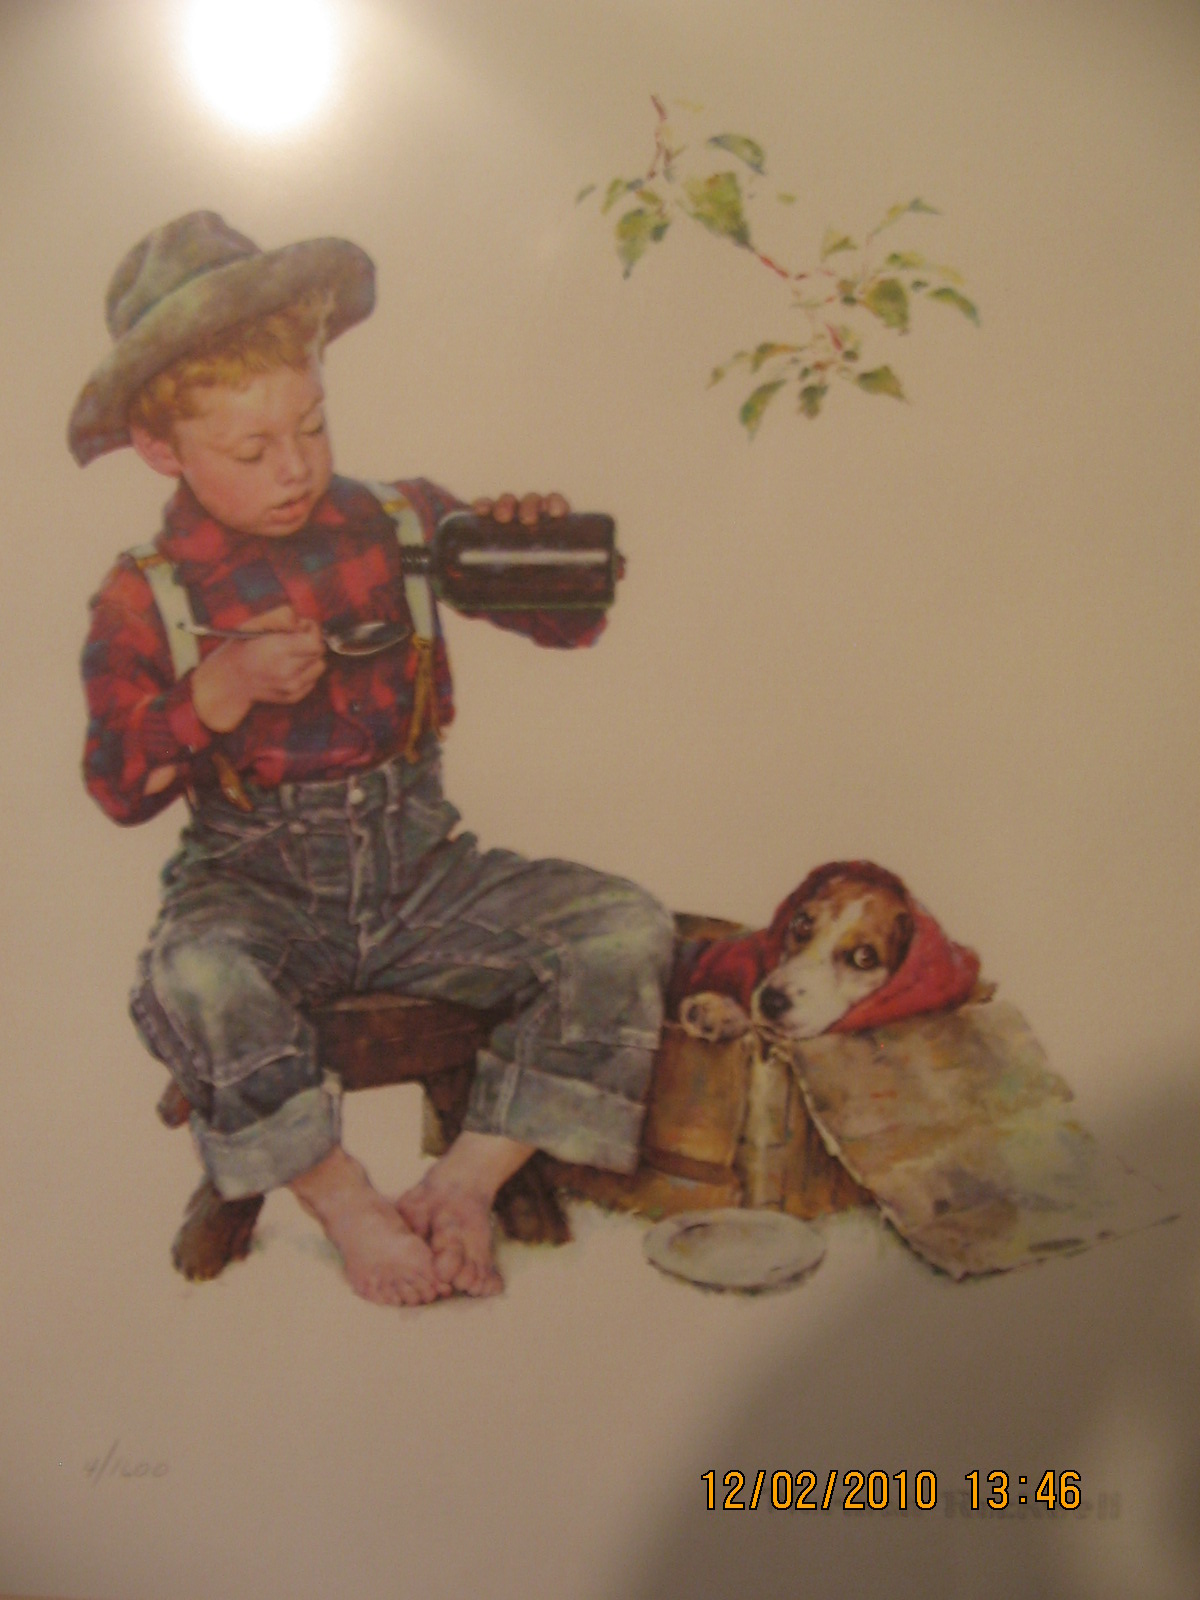 norman rockwell a boy and his dog figurines